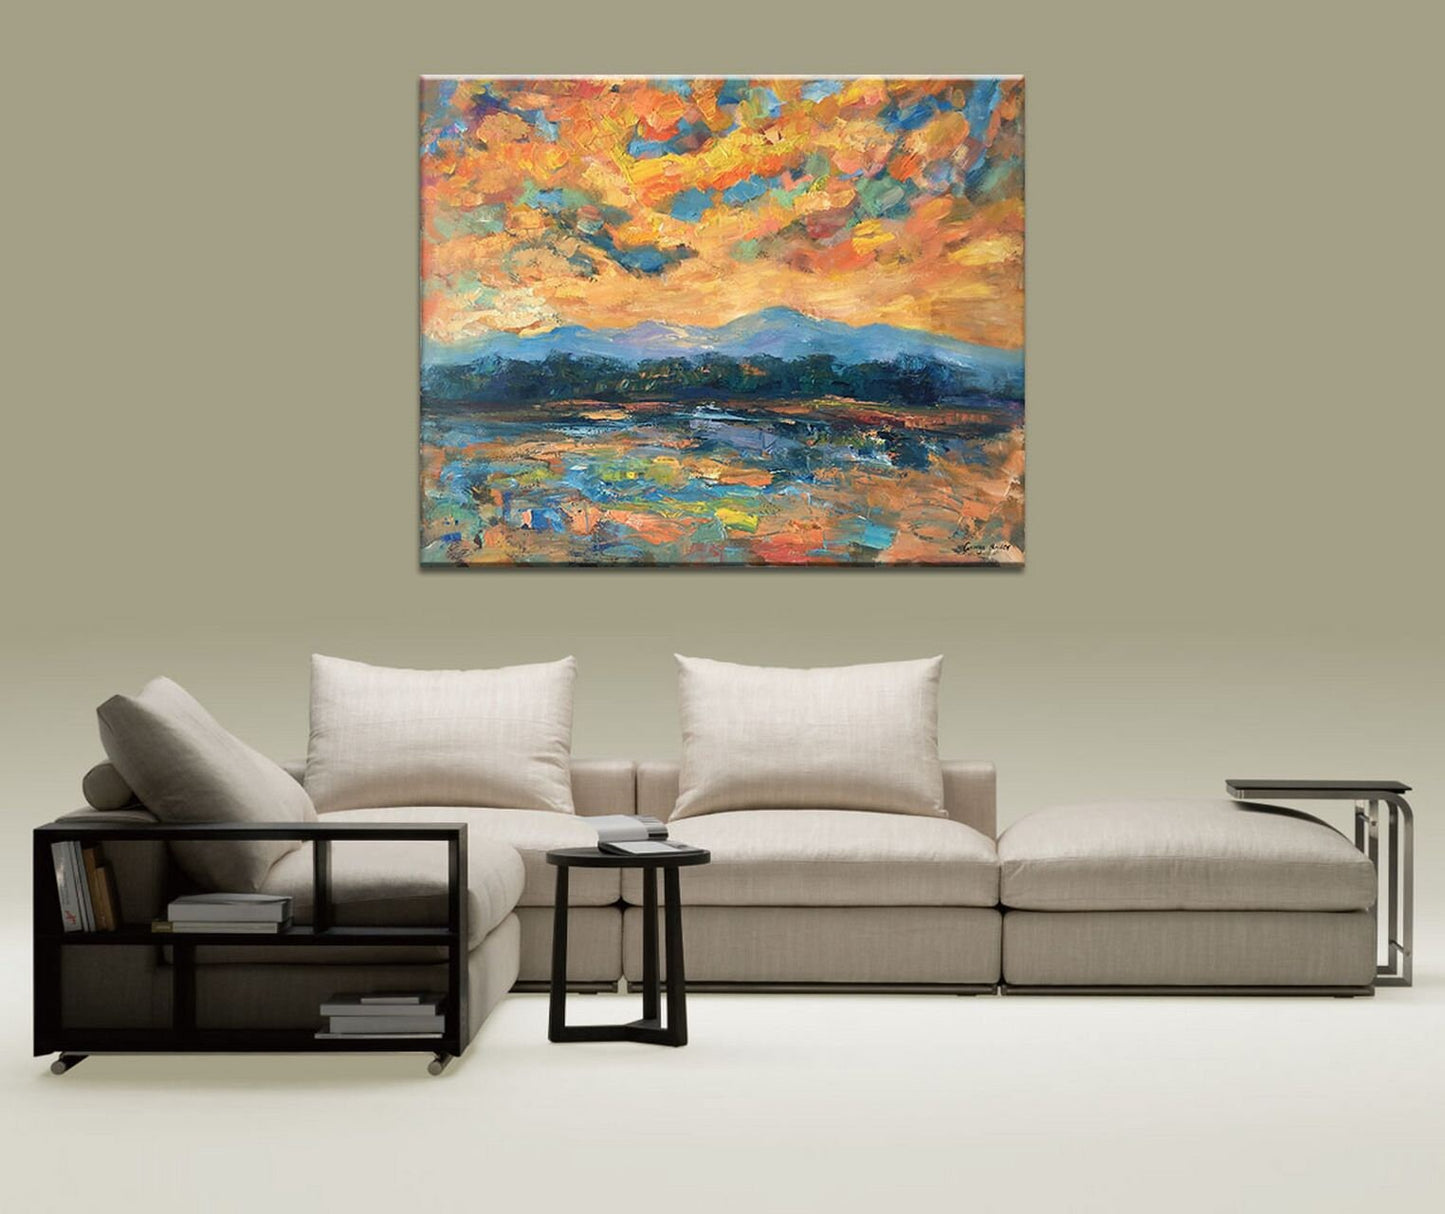 Abstract Art, Contemporary Art, Original Oil Painting, Abstract Canvas Art, Landscape Painting, Wall Decor, Art Decor, Large Abstract Art